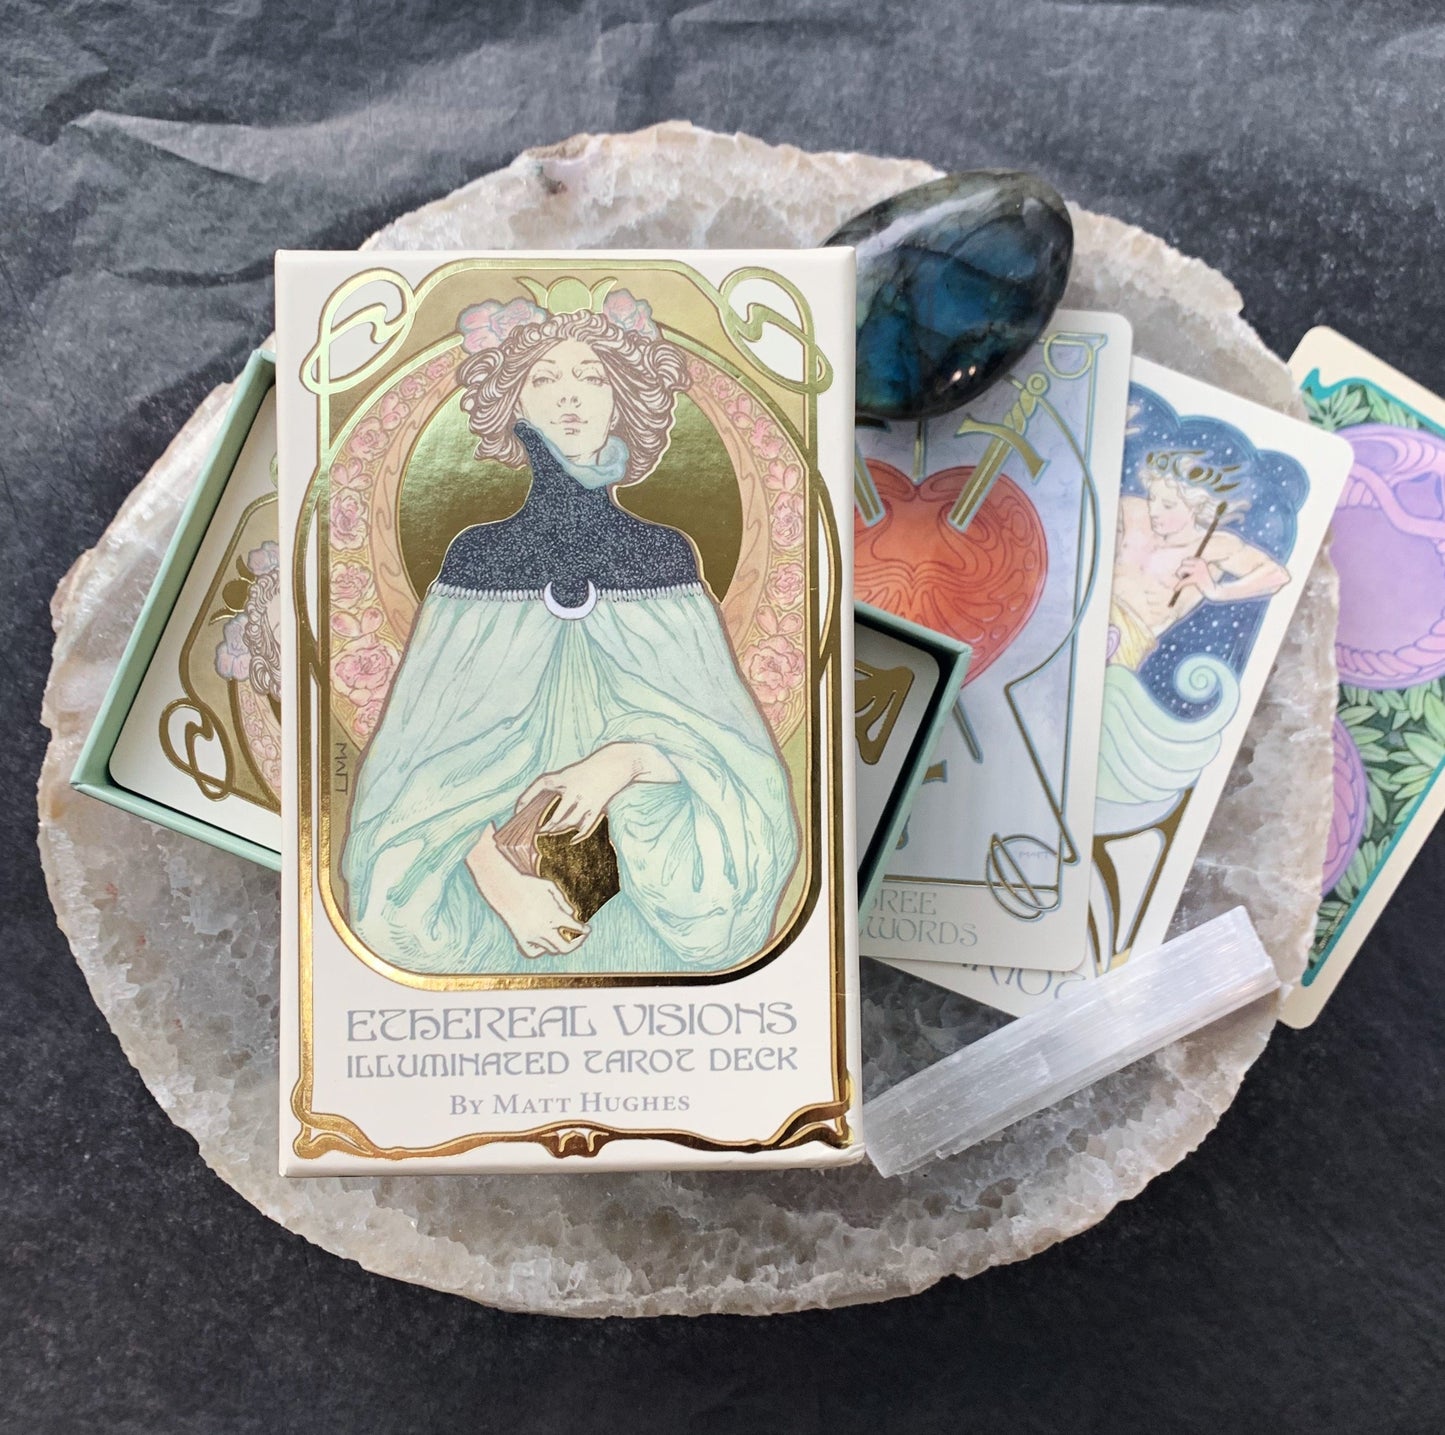 Etherreal Visions Tarot Cards